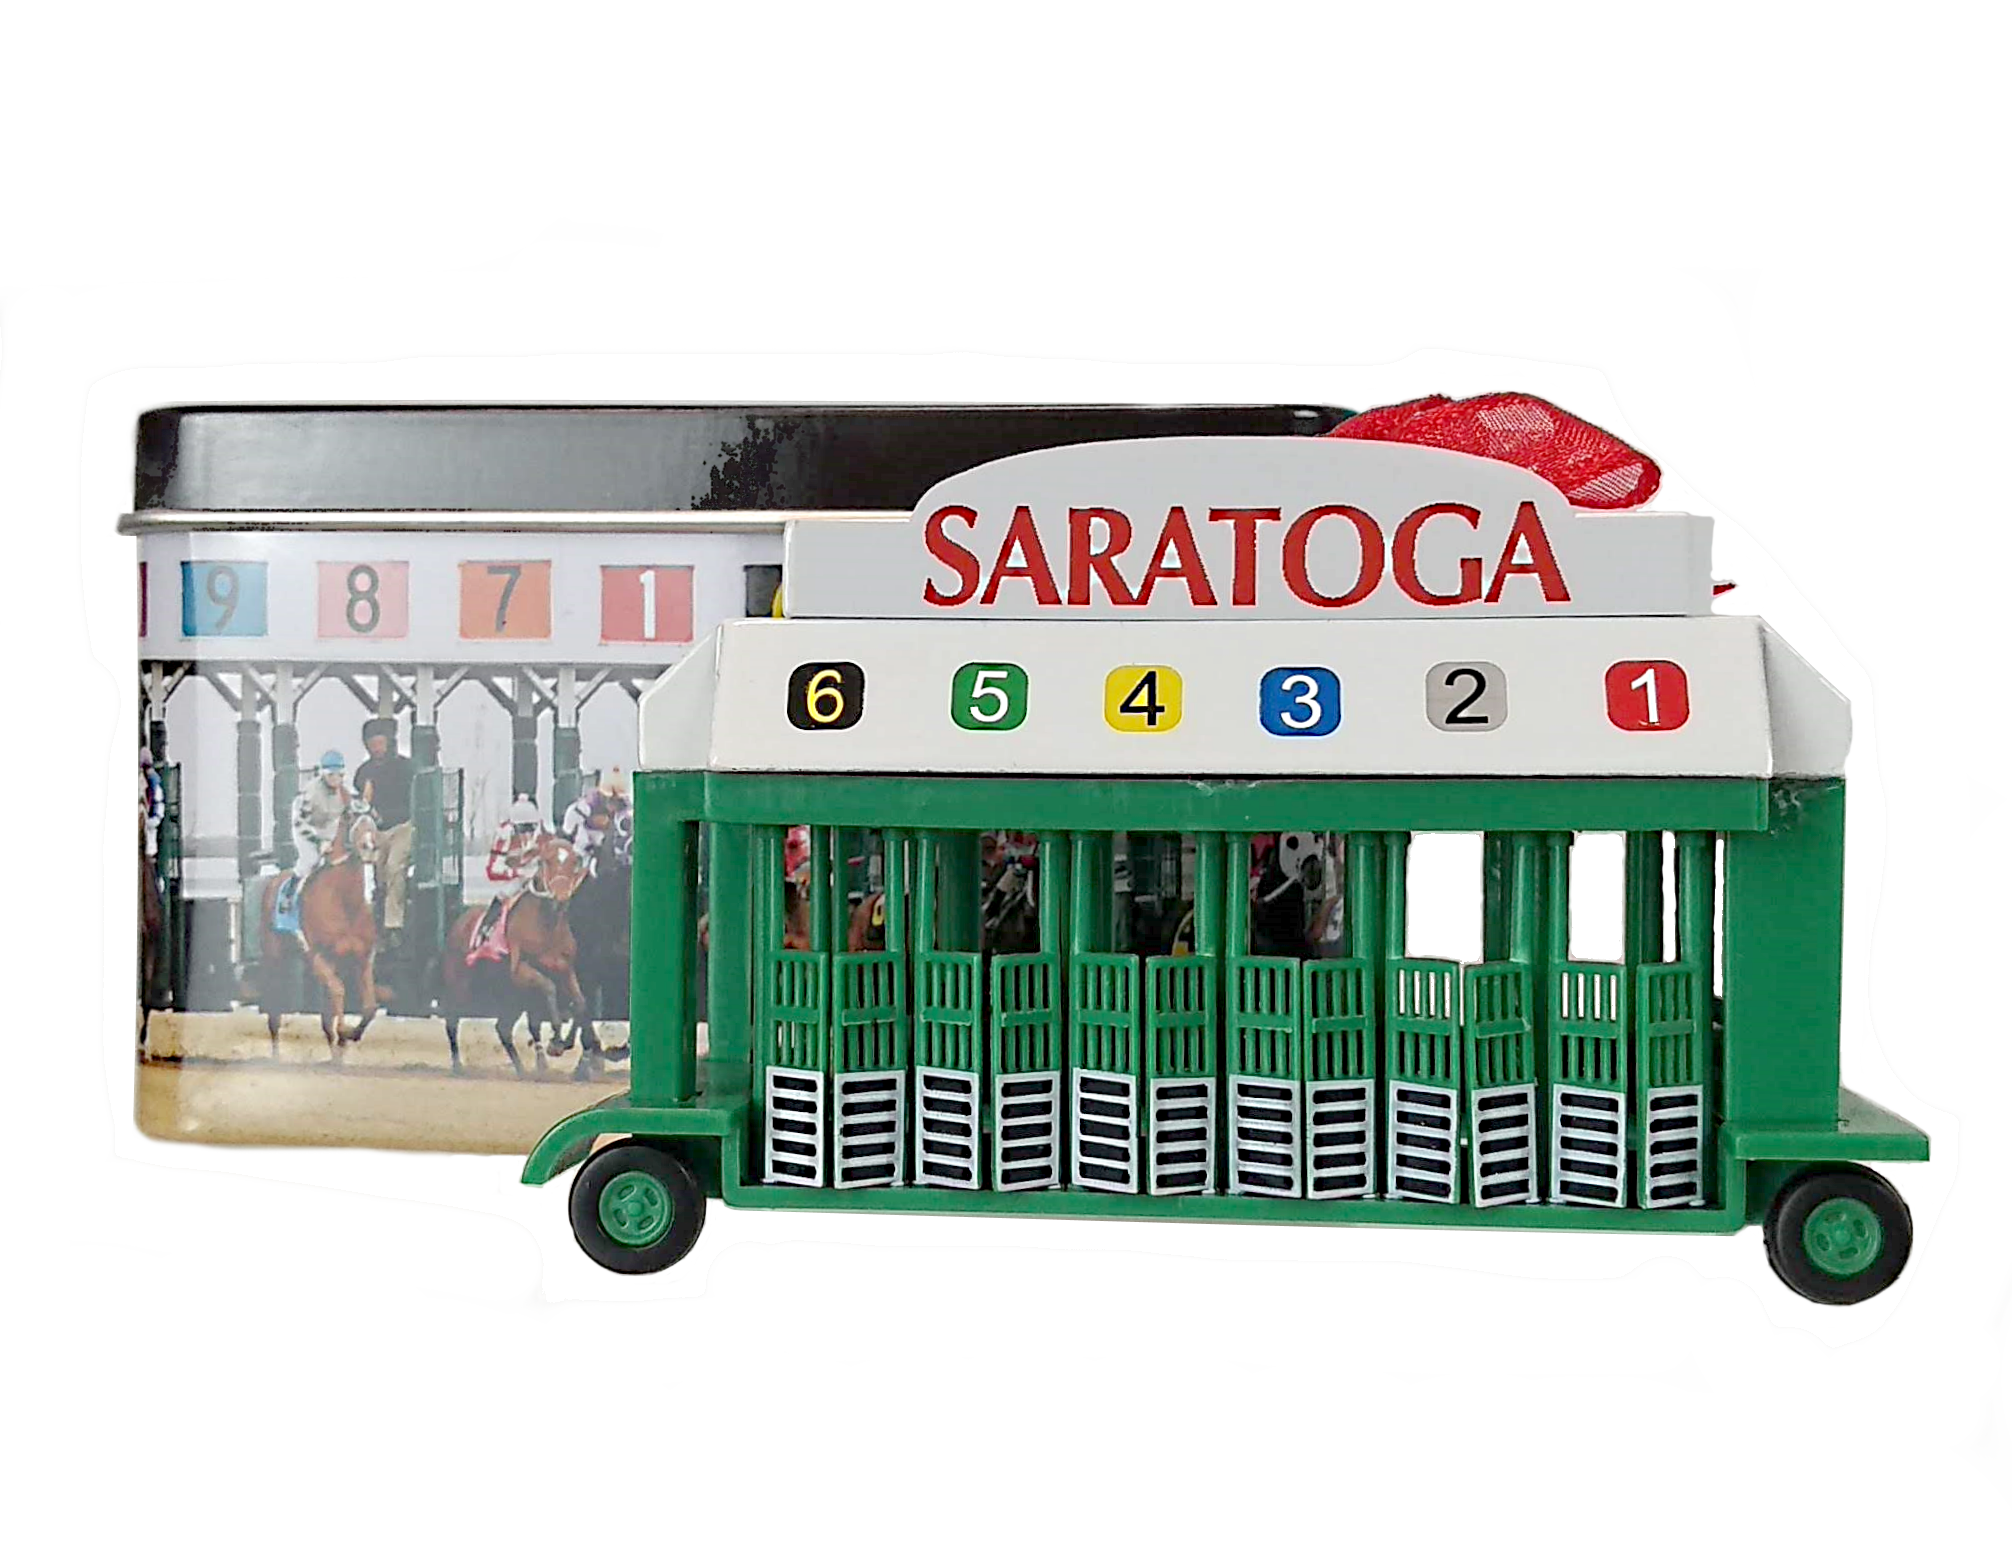 Starting Gate Ornament and Tin